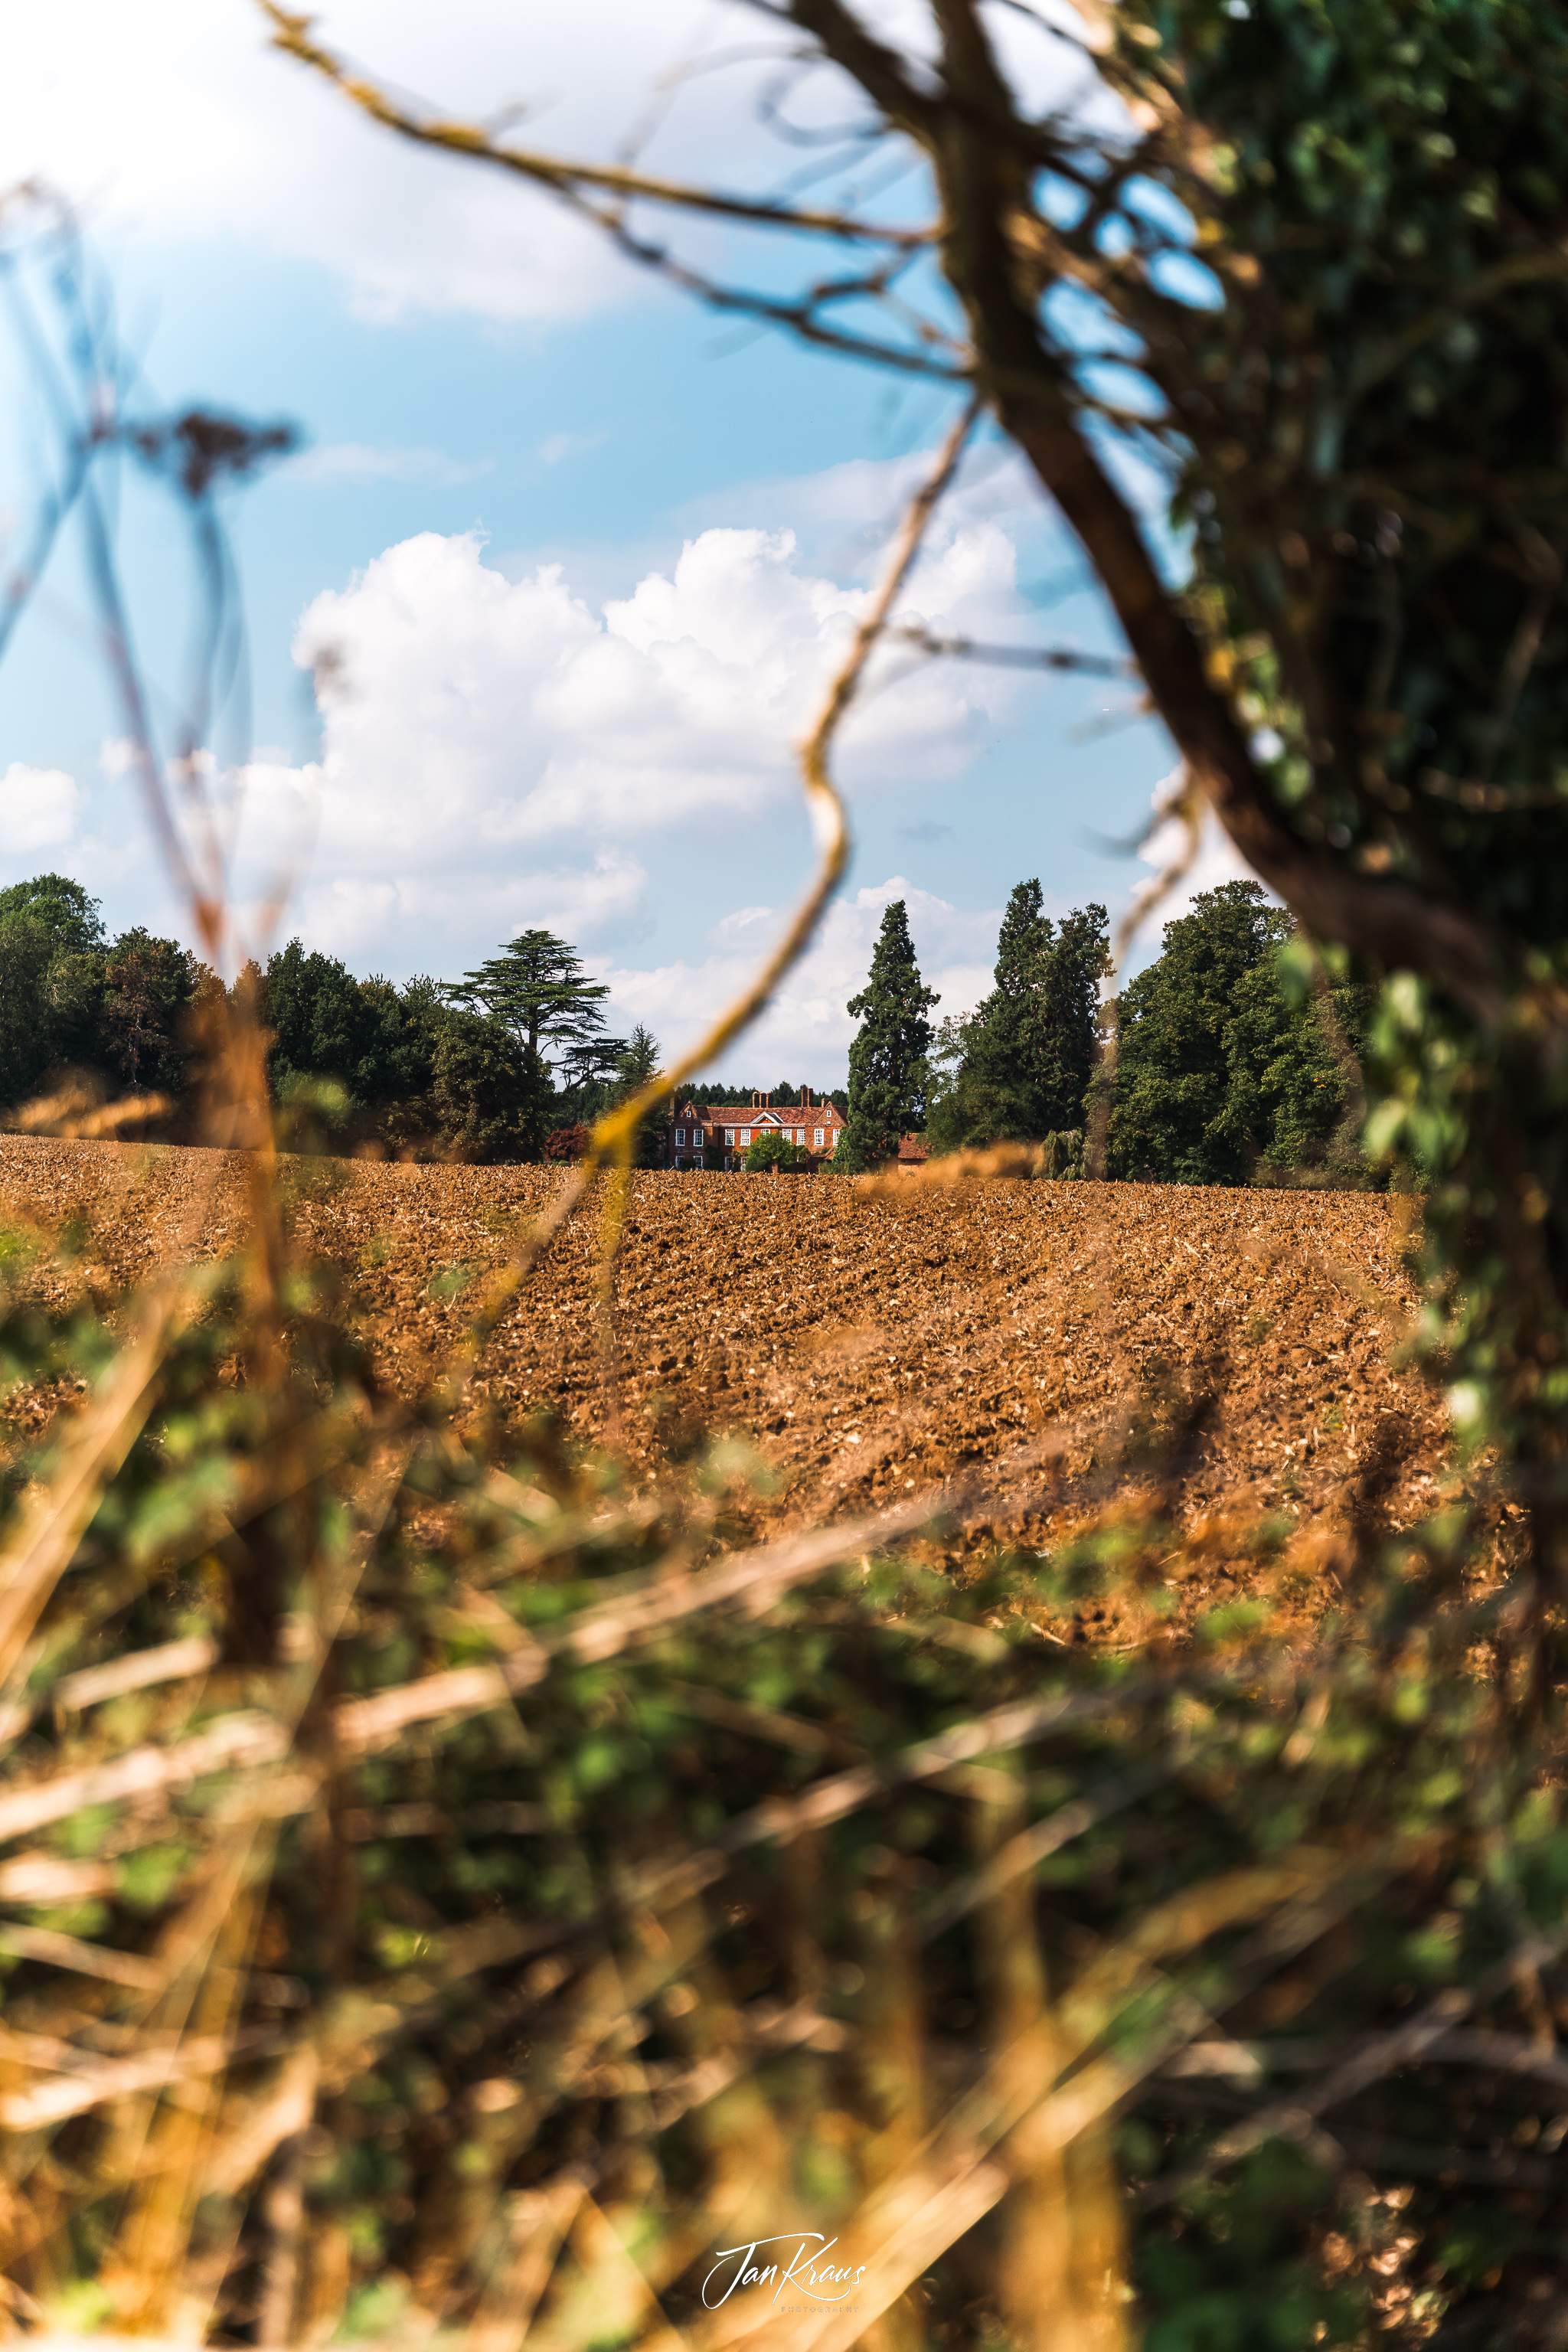 A view of buildings from Little Offley hamlet, Hertfordshire, England, UK